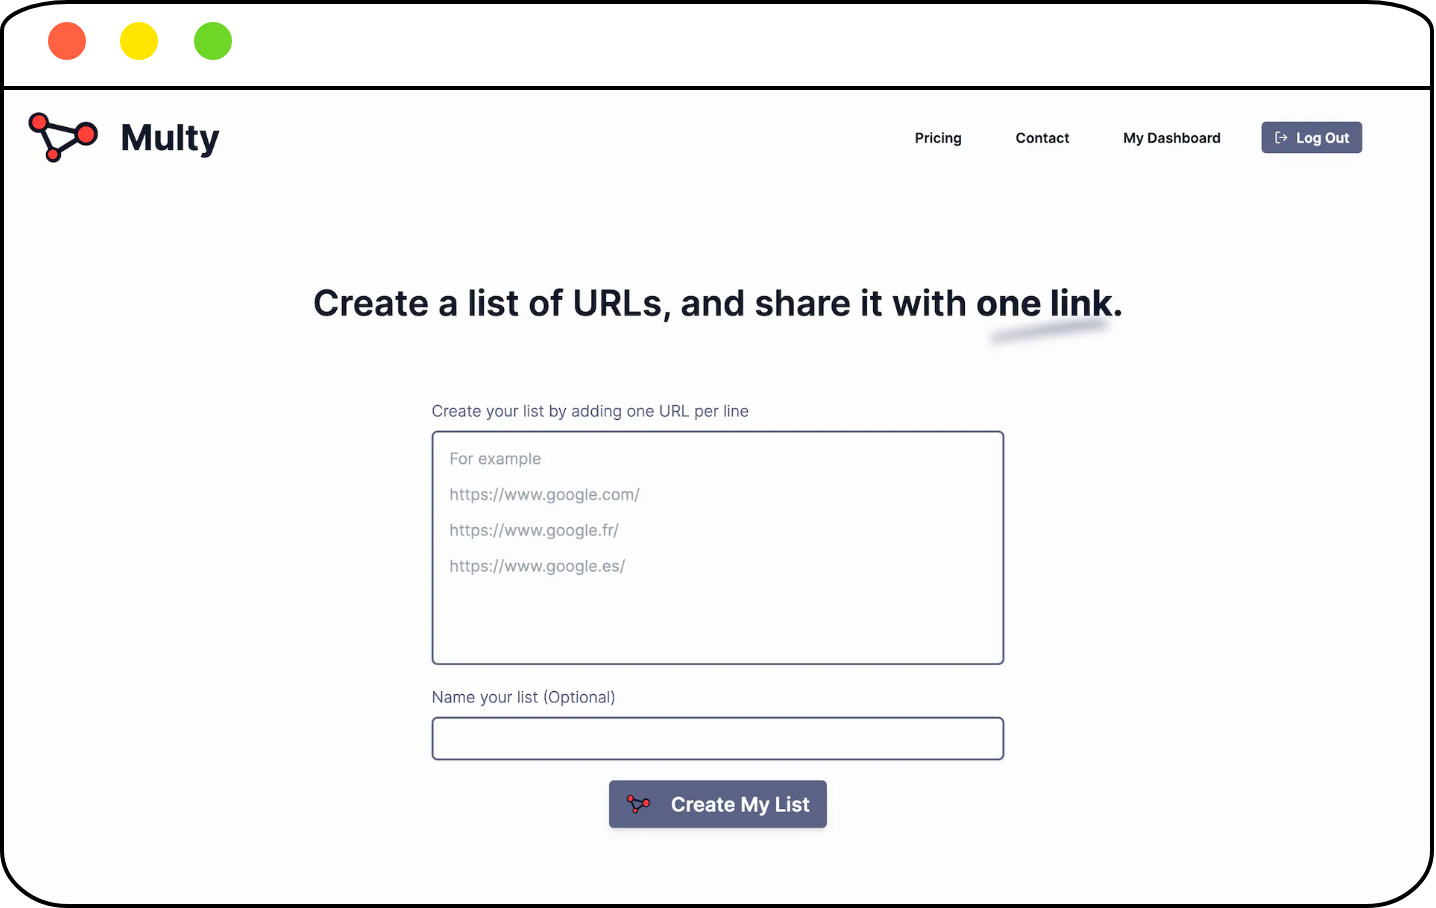 Multy, a tool to share URLs with one short link